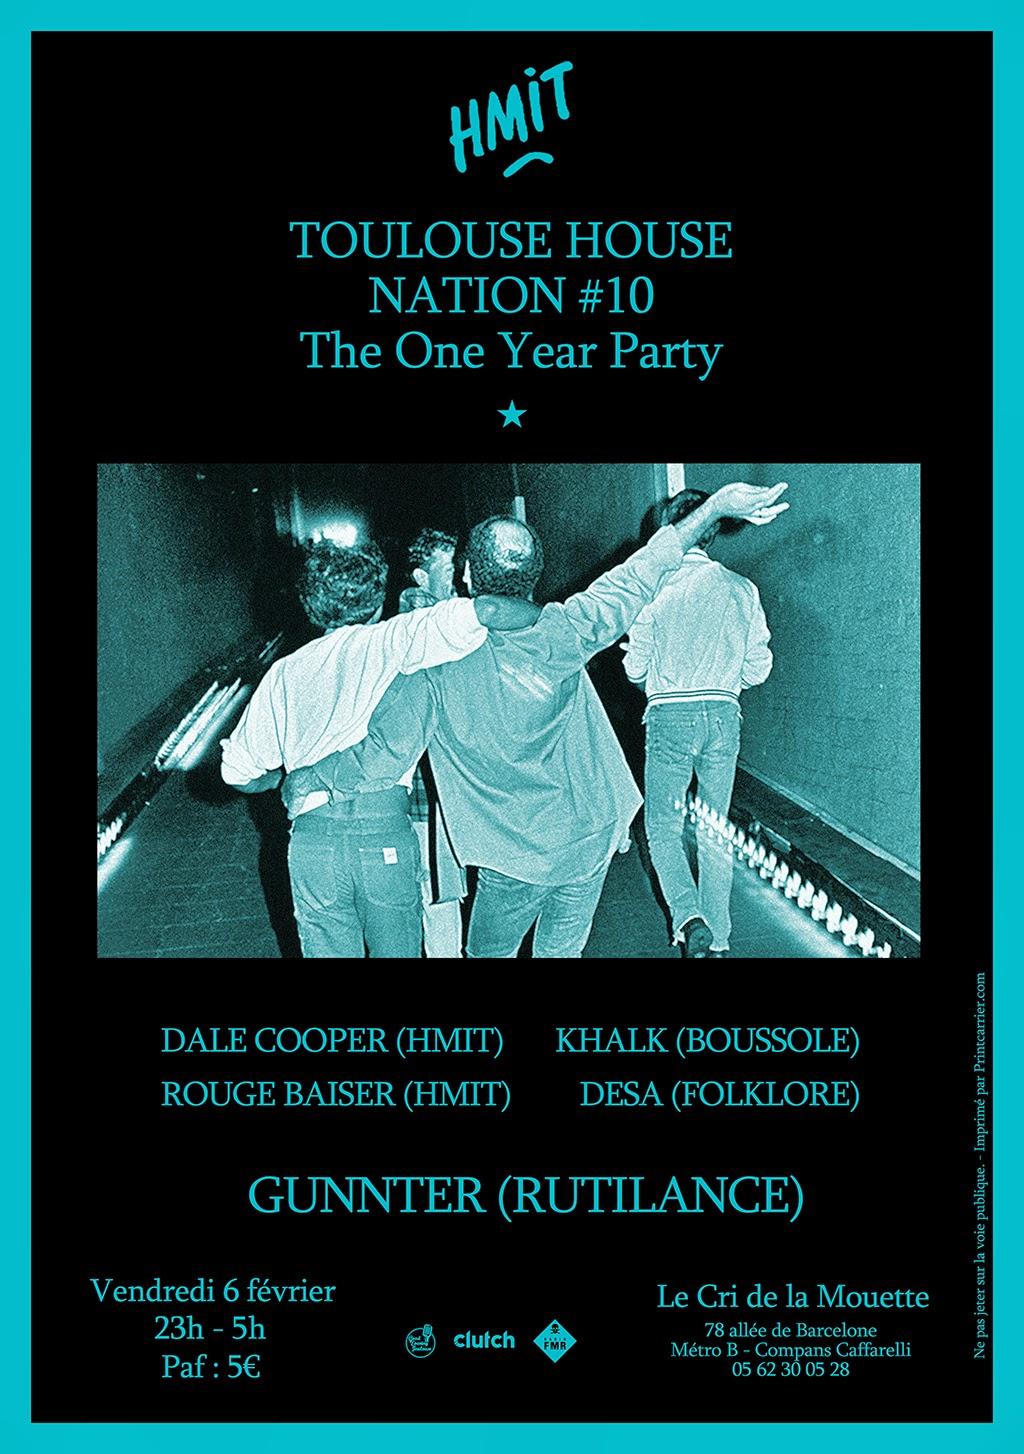 Toulouse House Nation #10 - The One Year Party! - Khalk